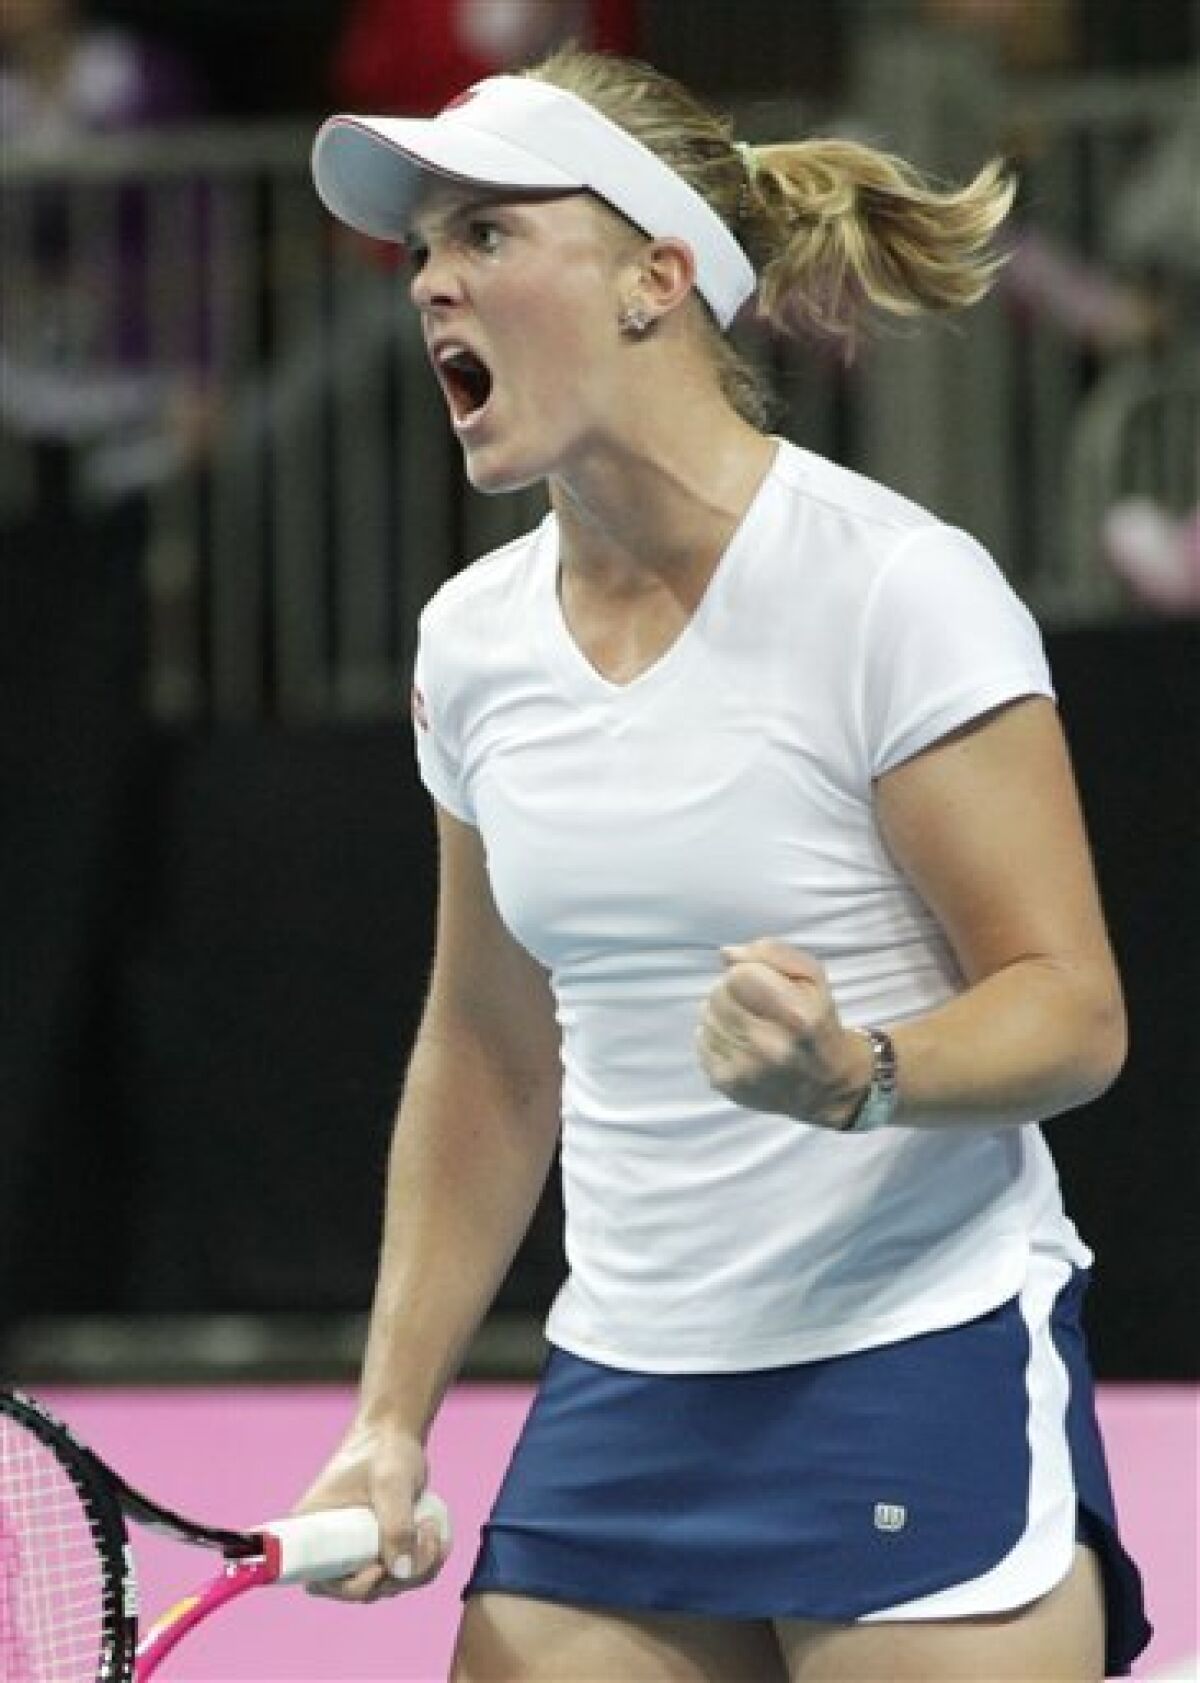 US player Melanie Oudin reacts during the World Group Fed Cup match against Belgium in Antwerp, Belgium, Saturday, Feb. 5, 2011. Belgium leads on the first day 2-0. (AP Photo/Yves Logghe)